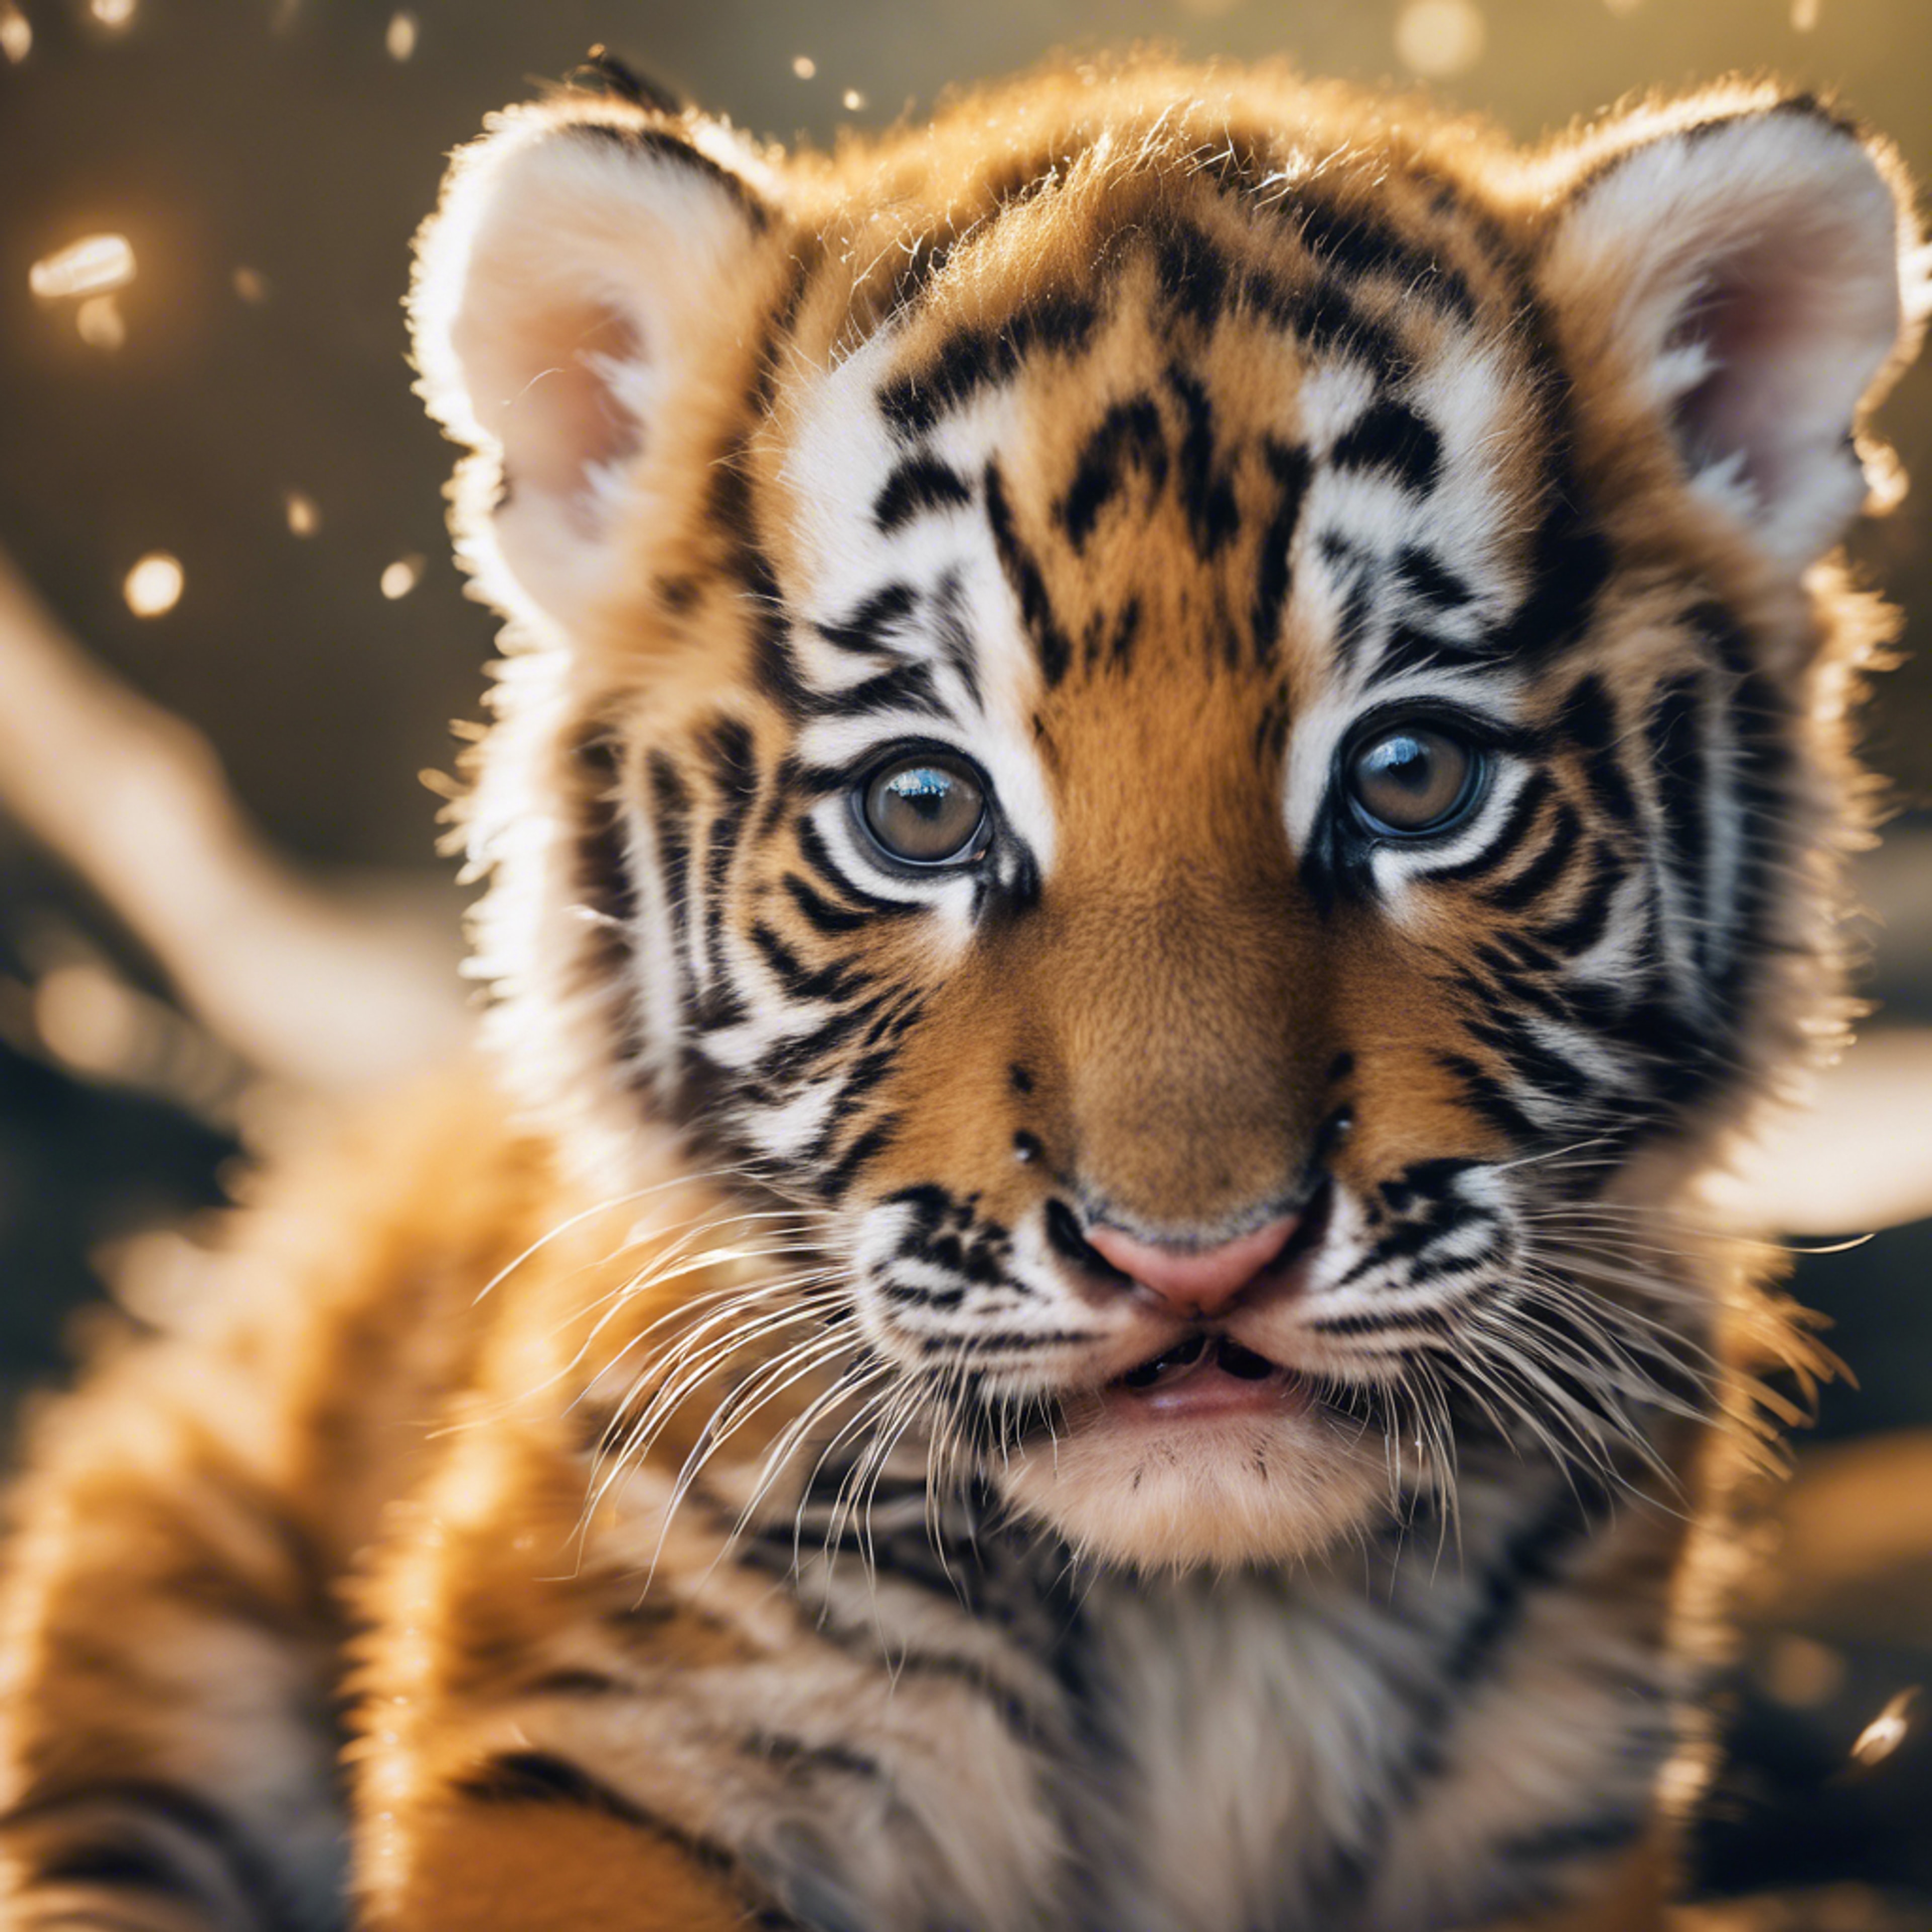 A lively orange tiger cub with large round eyes in a kawaii rendering.壁紙[41206ae9e13545bea05a]